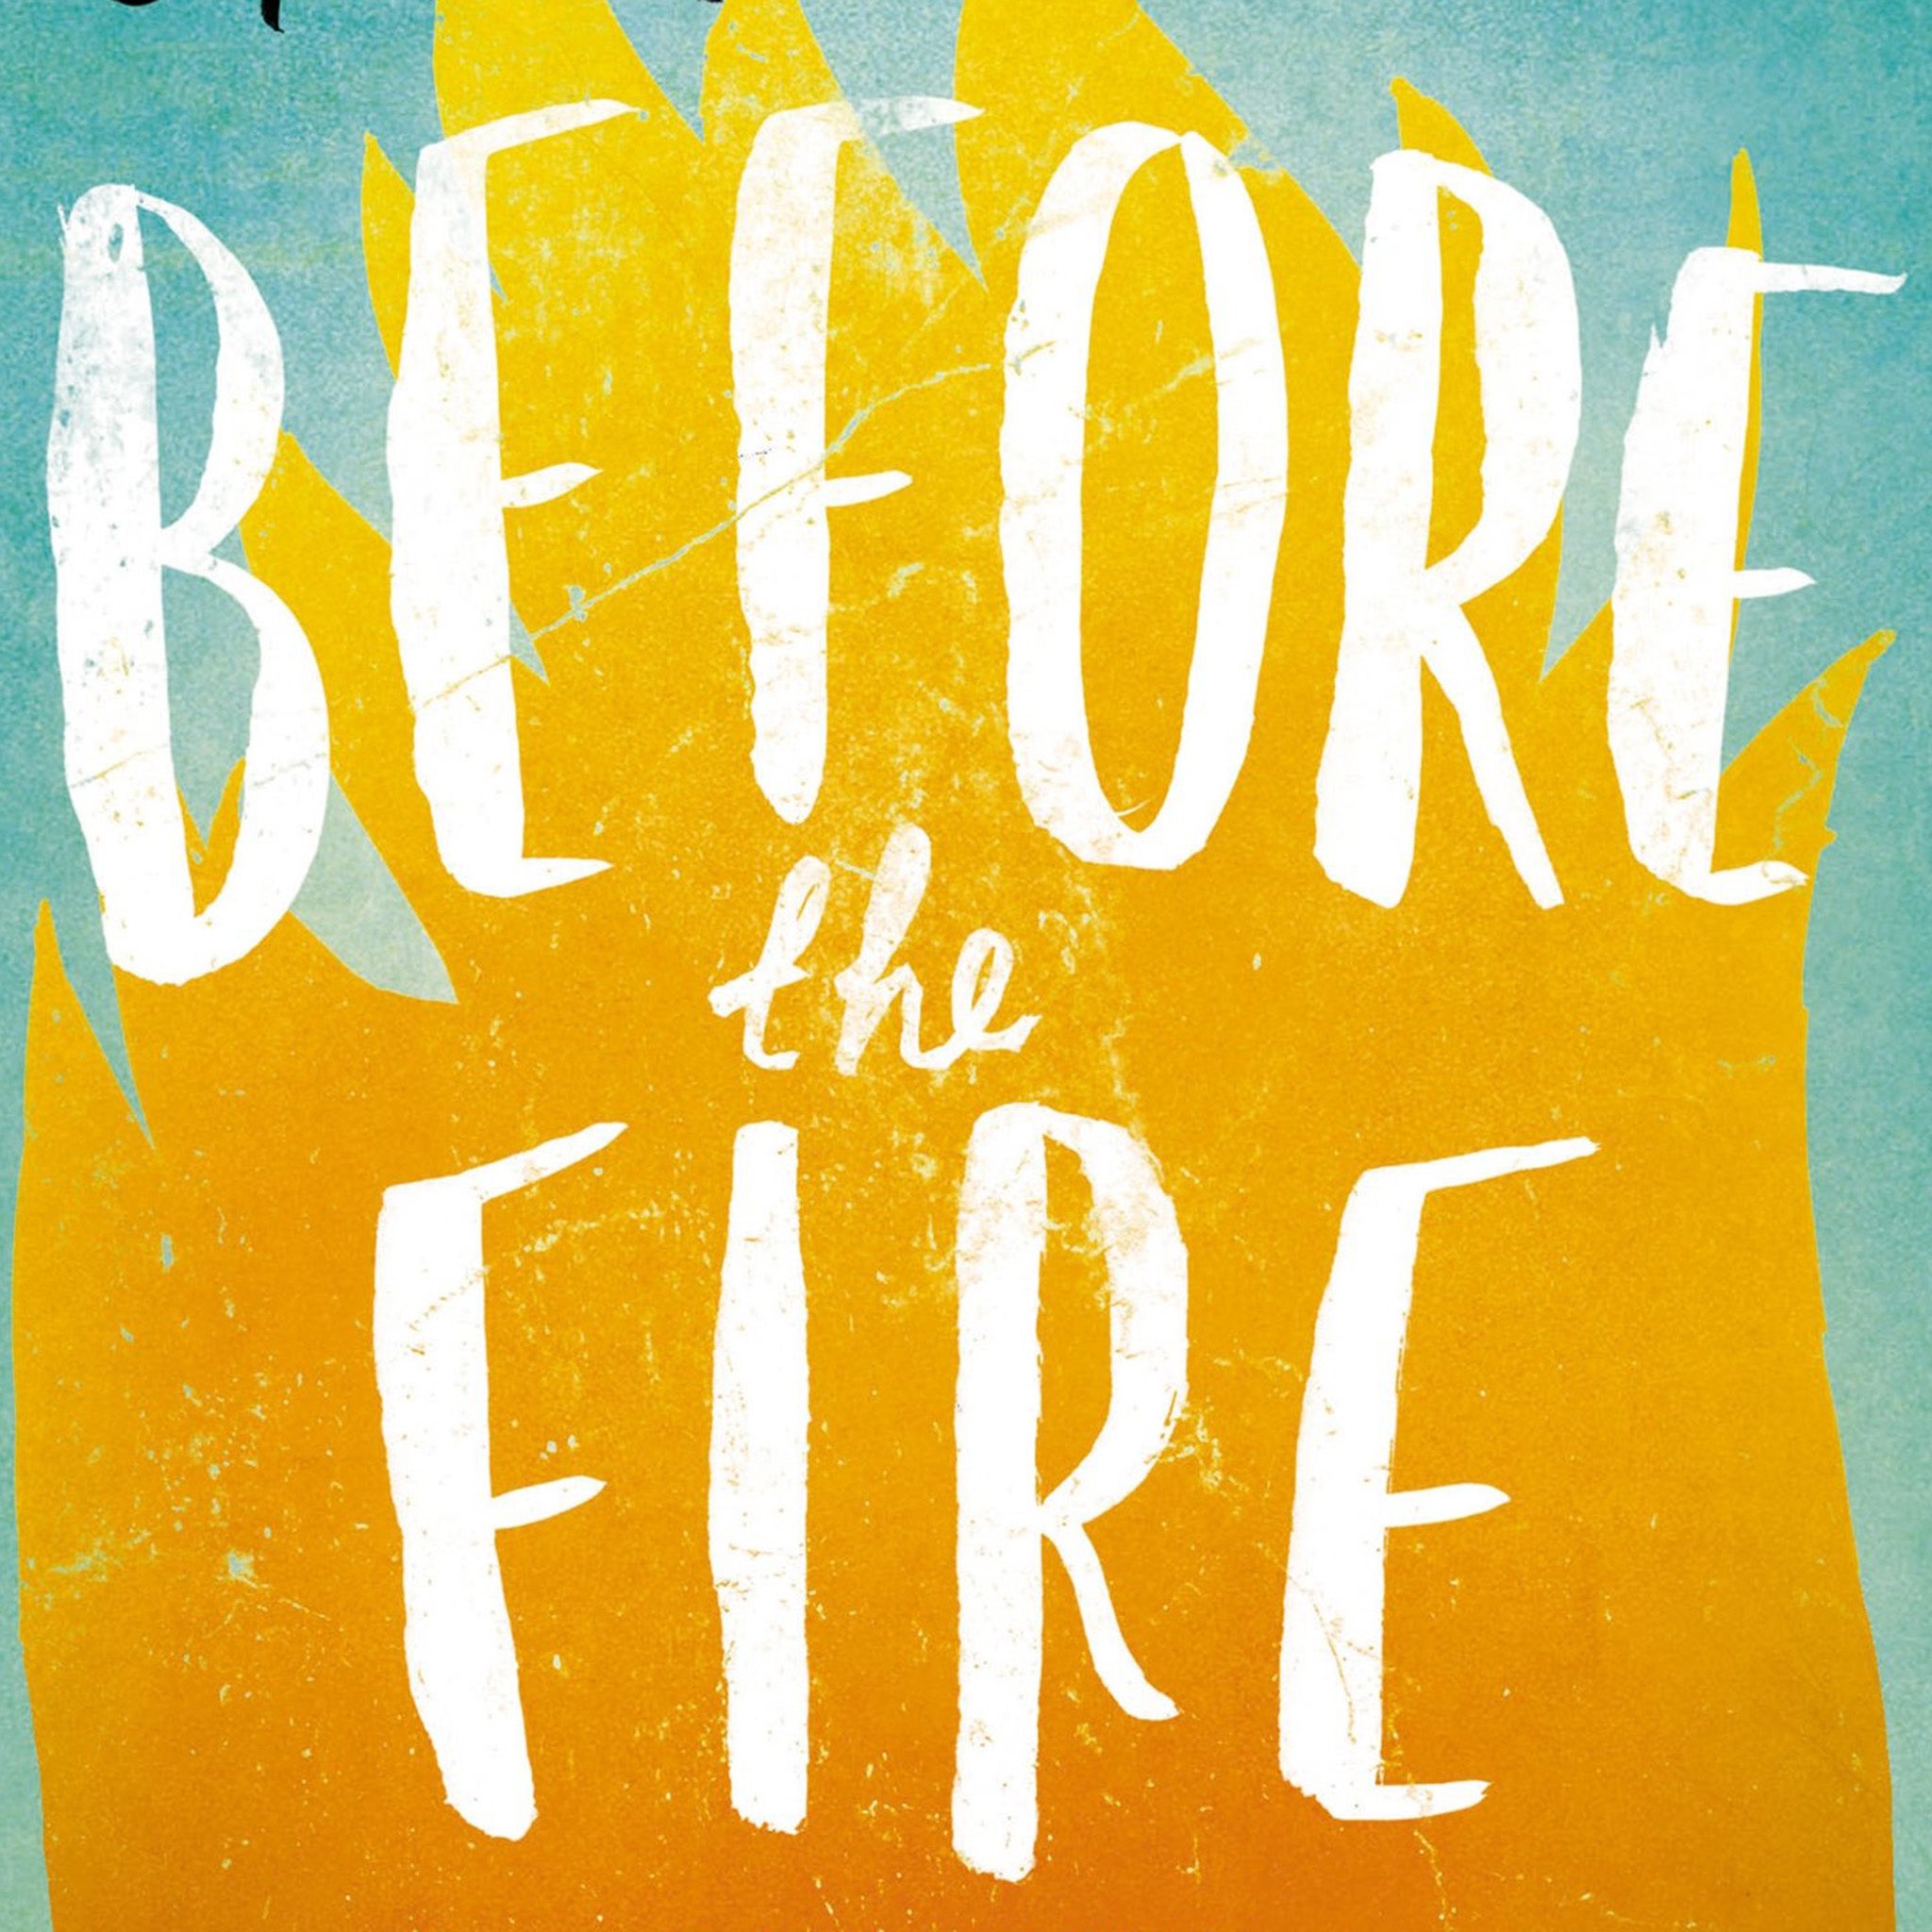 Before the Fire by Sarah Butler